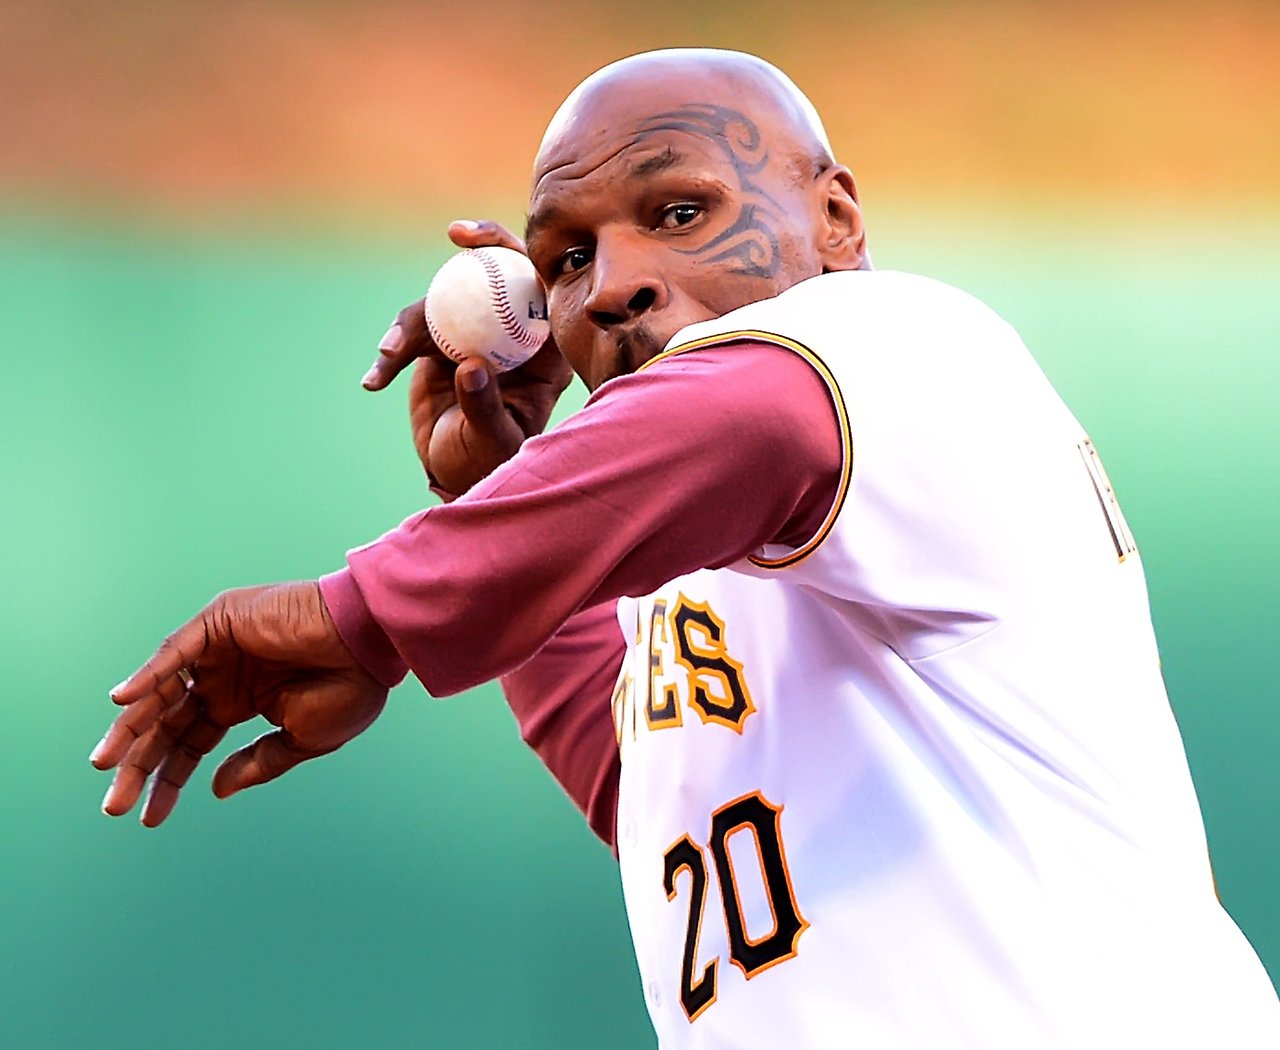 Iron Mike Tyson throws out the first pitch as the Pirates take on the Brewers at PNC Park on Thursday, April 17, 2014. 
&#8212;Peter Diana/Post-Gazette